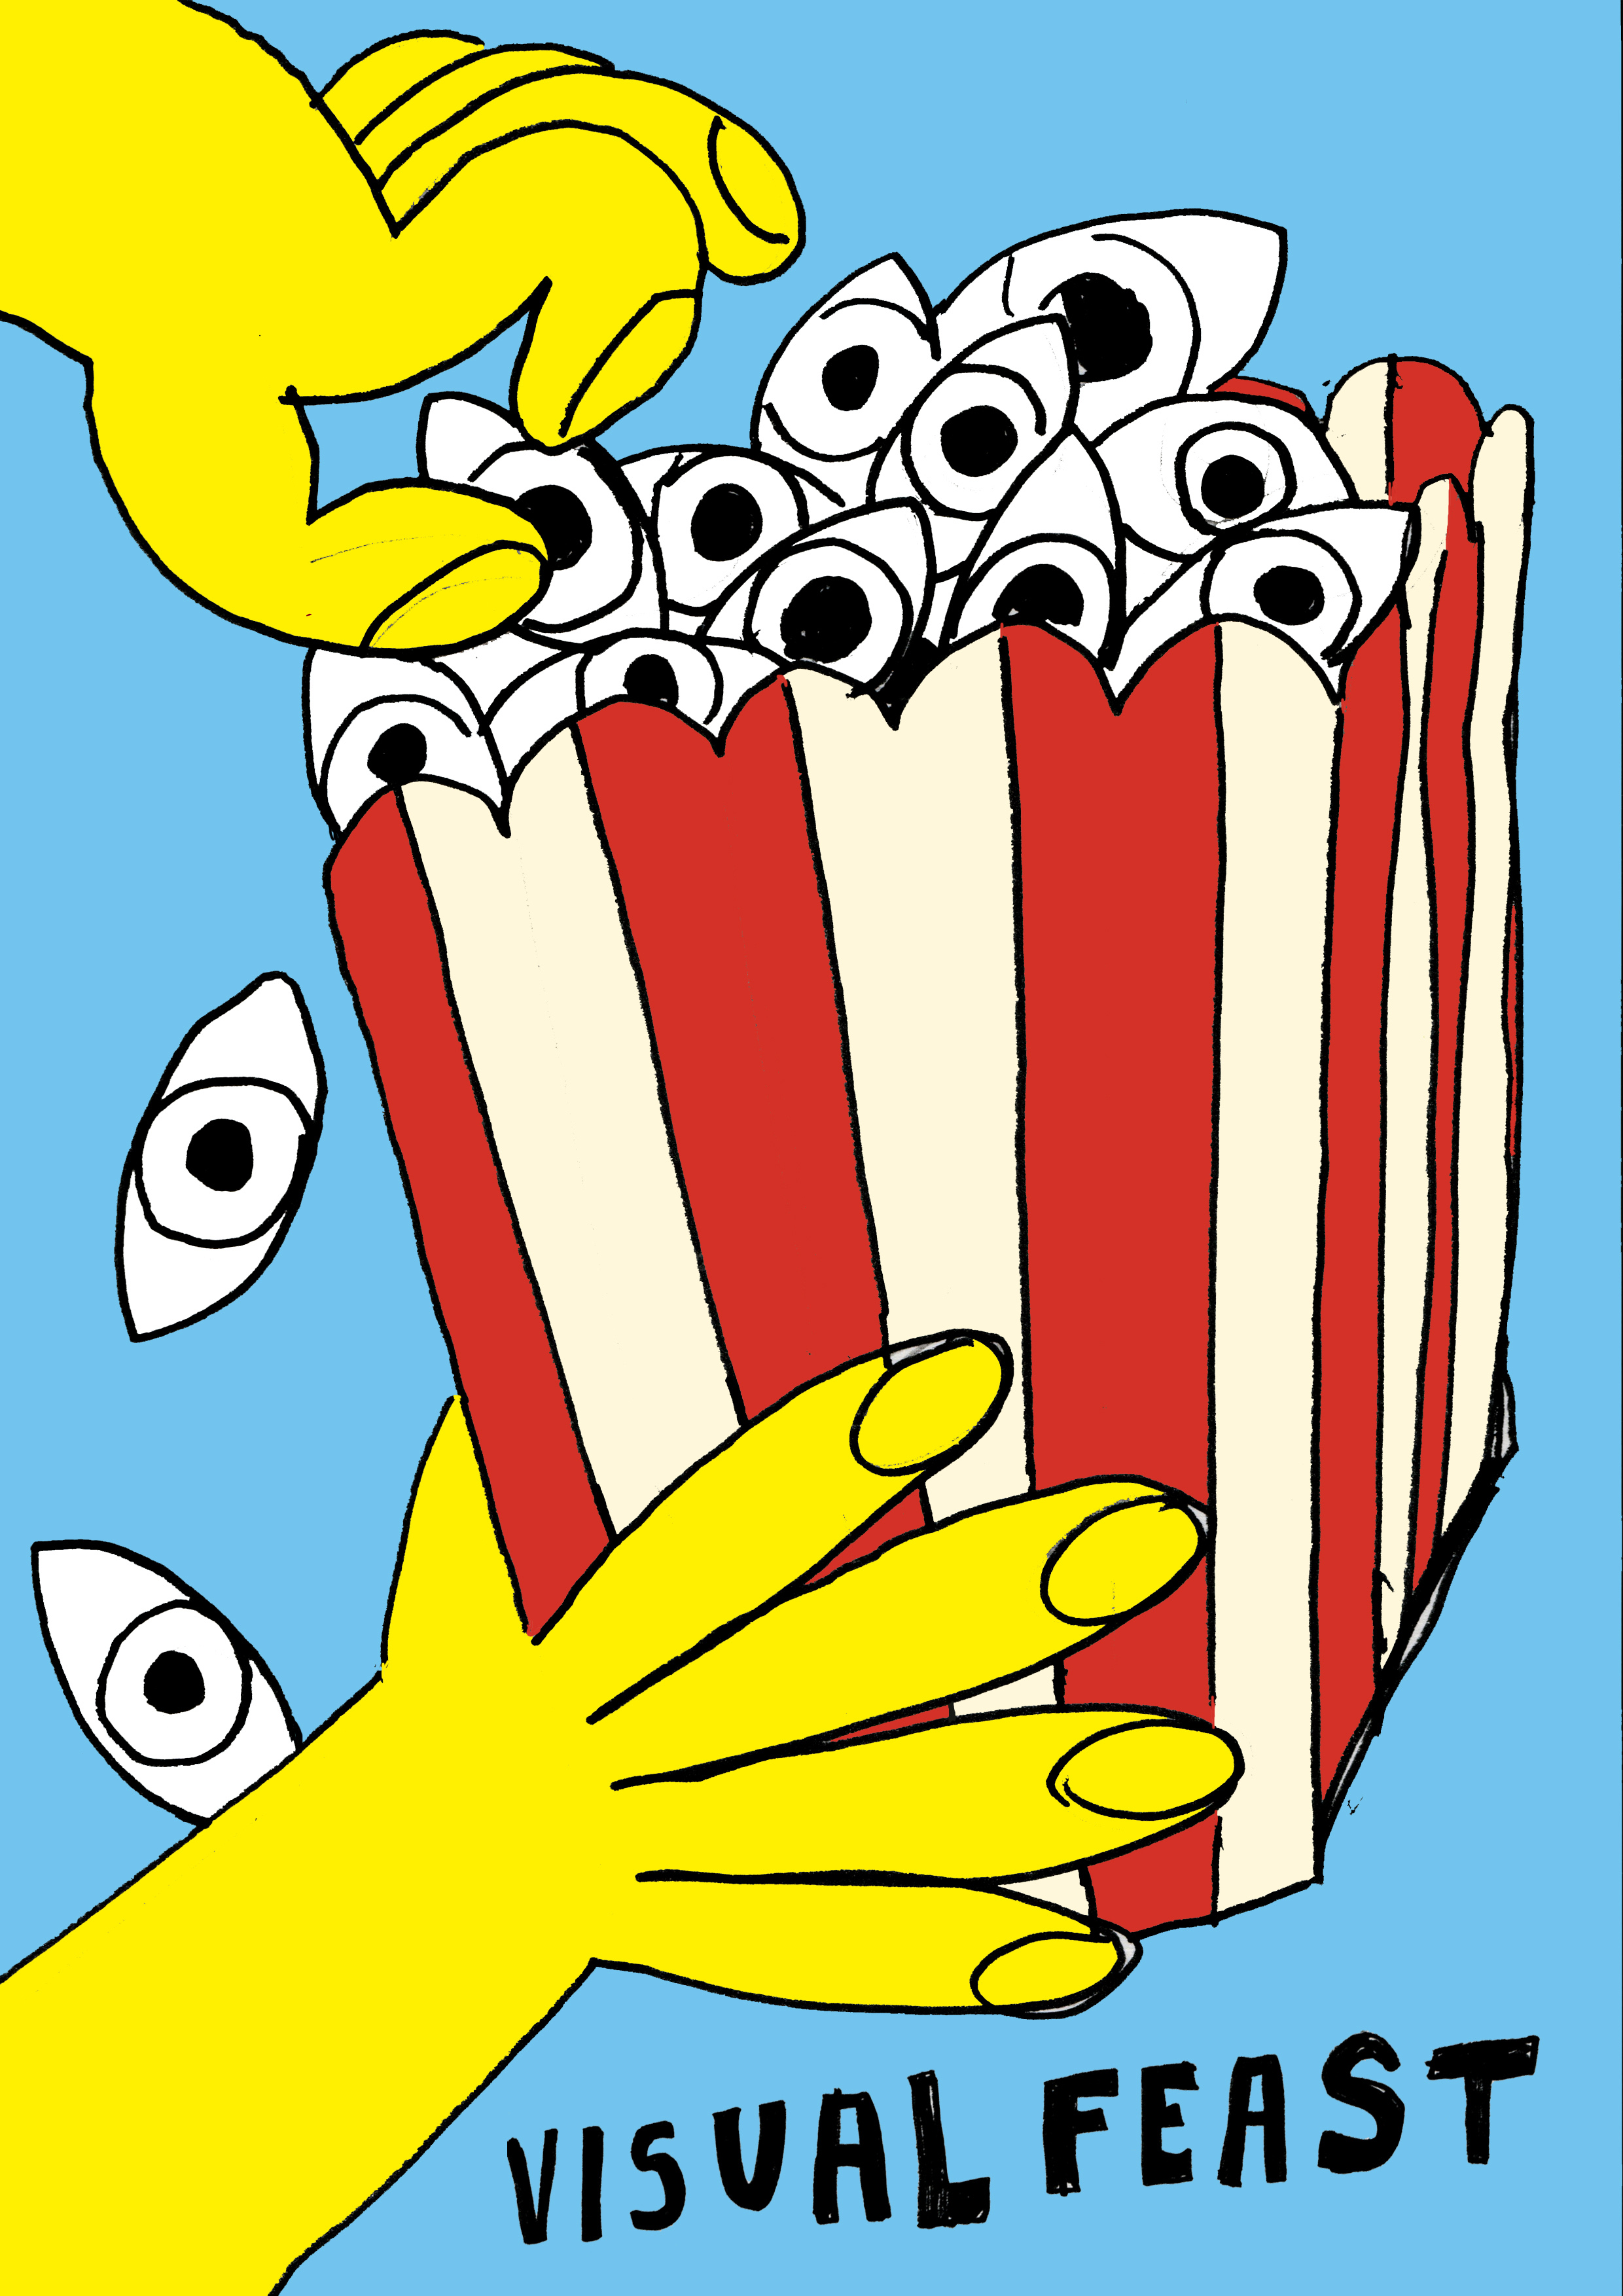 BA illustration work by Jessica Gledhill of yellow hands reaching for a red striped popcorn box with eyeballs inside. captioned "visual Feast".